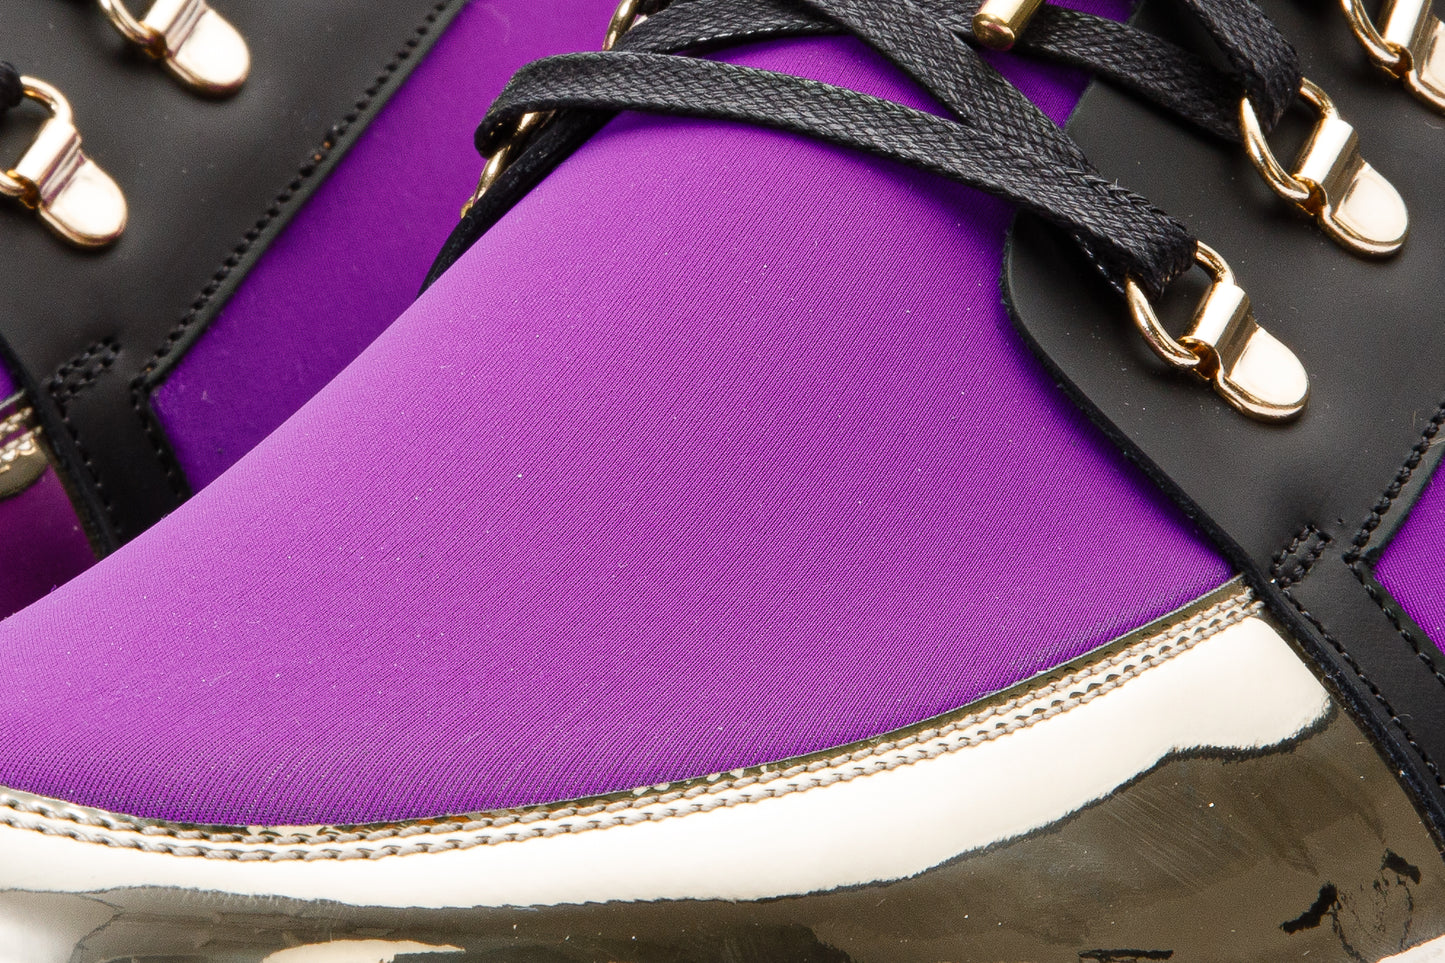 The Emir Purple Leather Men Sneaker Limited Edition